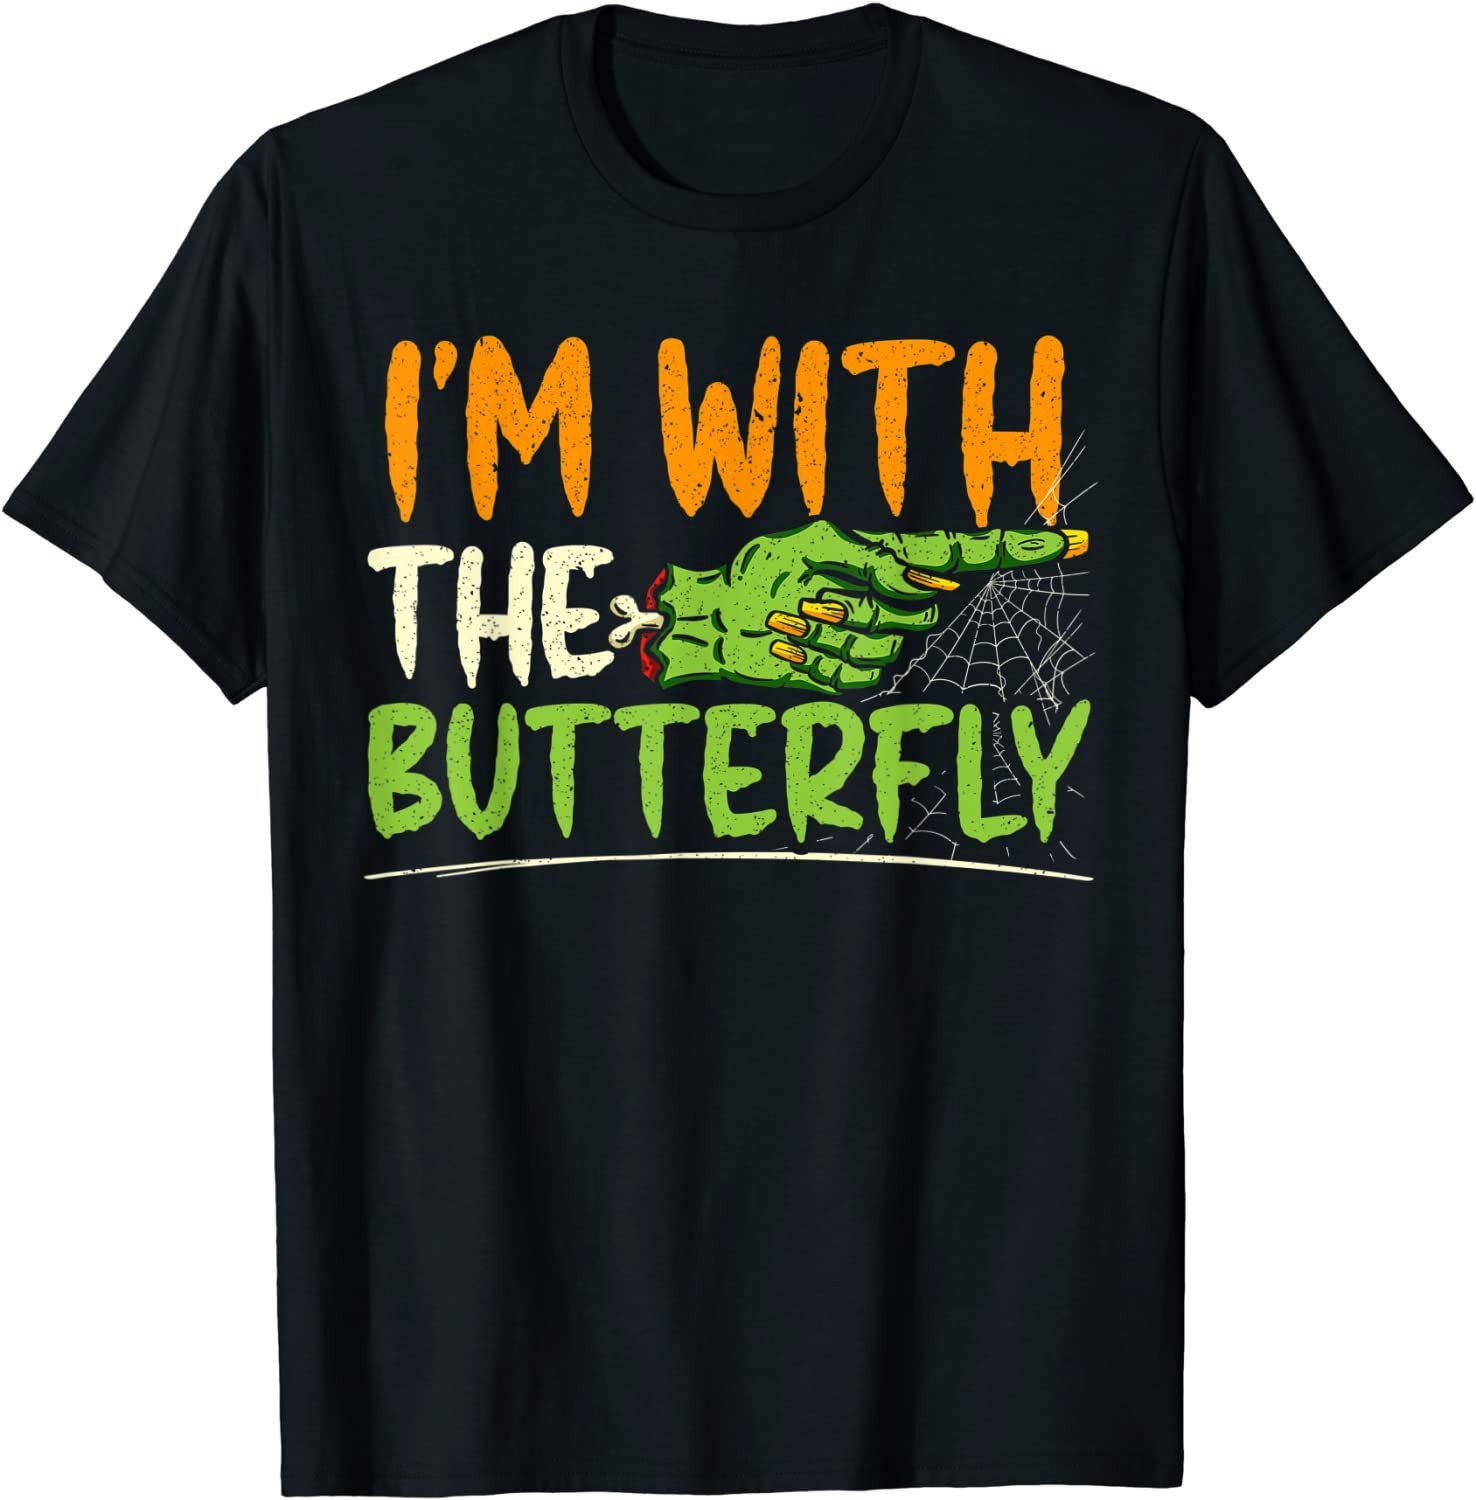 For A I'm With The Butterfly Halloween T-Shirt